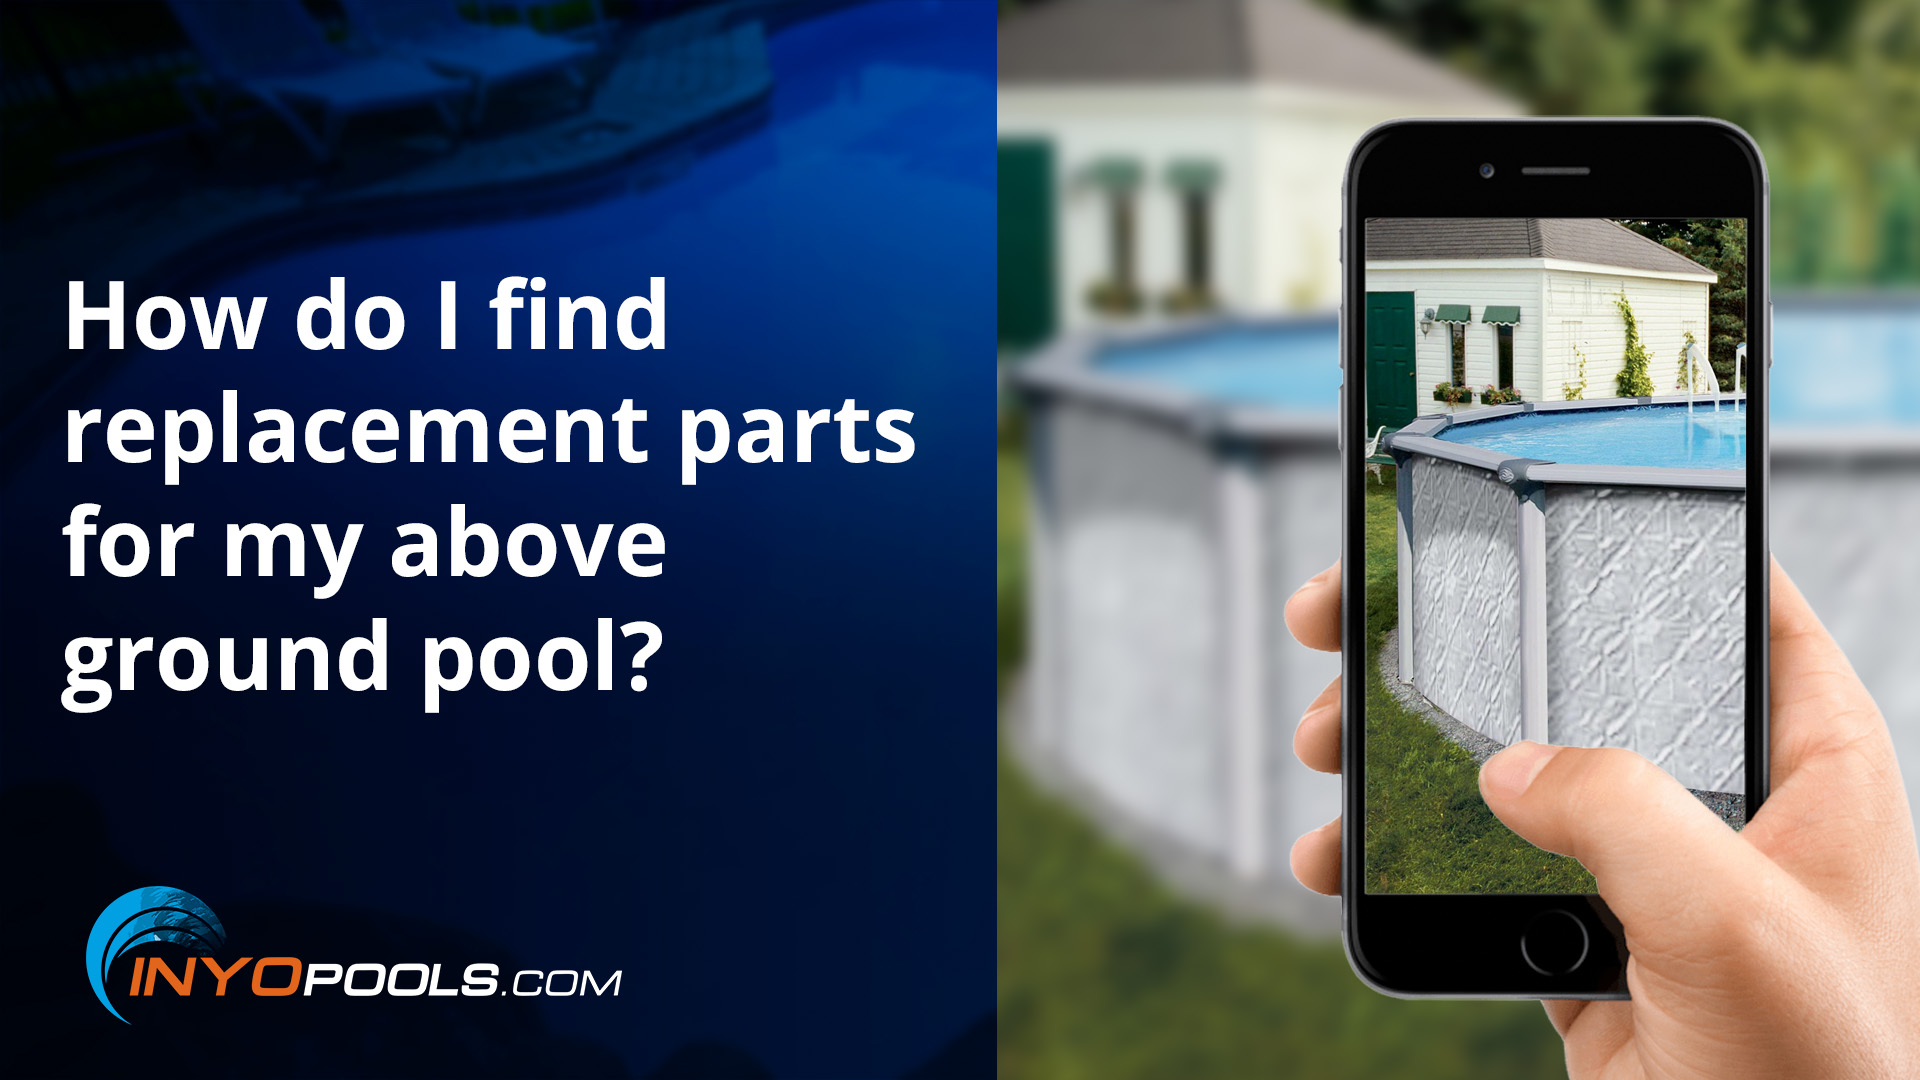 How do I find replacement parts for my above ground pool?